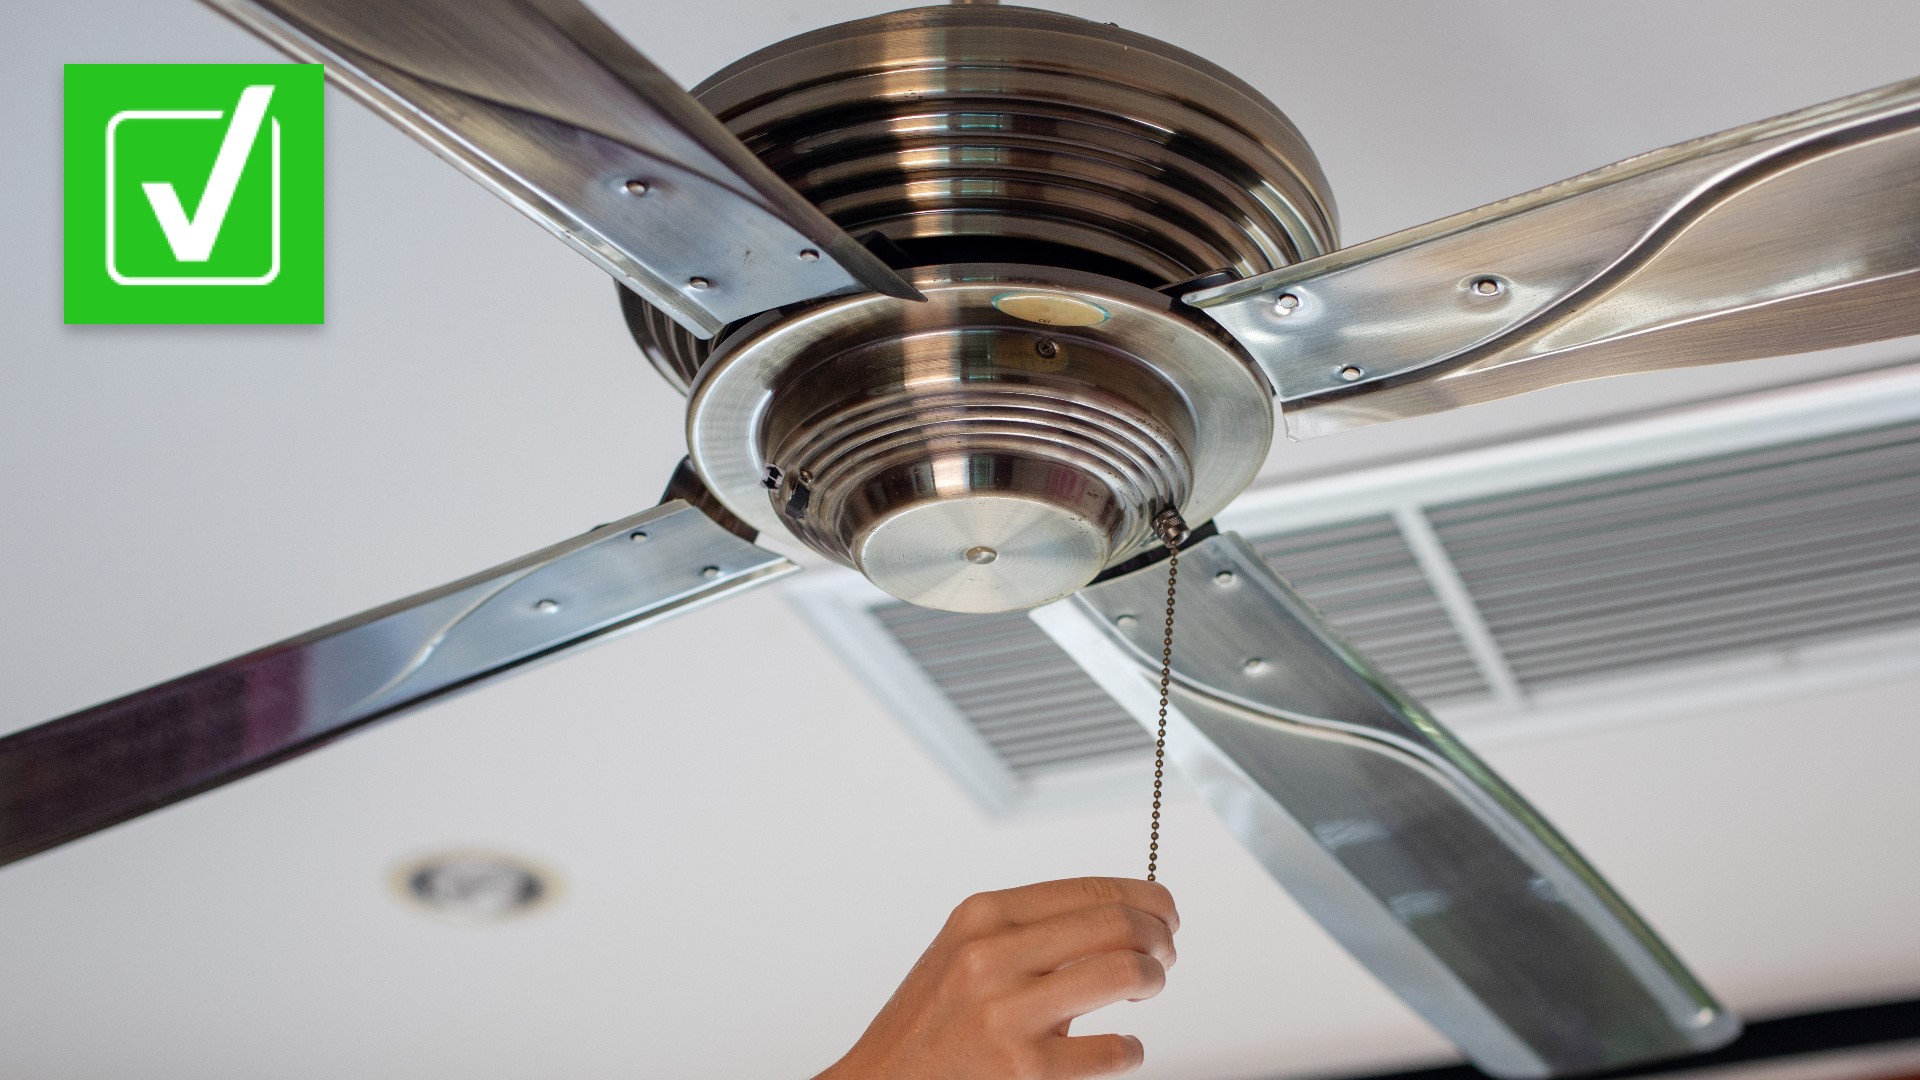 Ceiling Fan Go In The Summer, Which Direction Should Your Ceiling Fan Turn In The Summertime